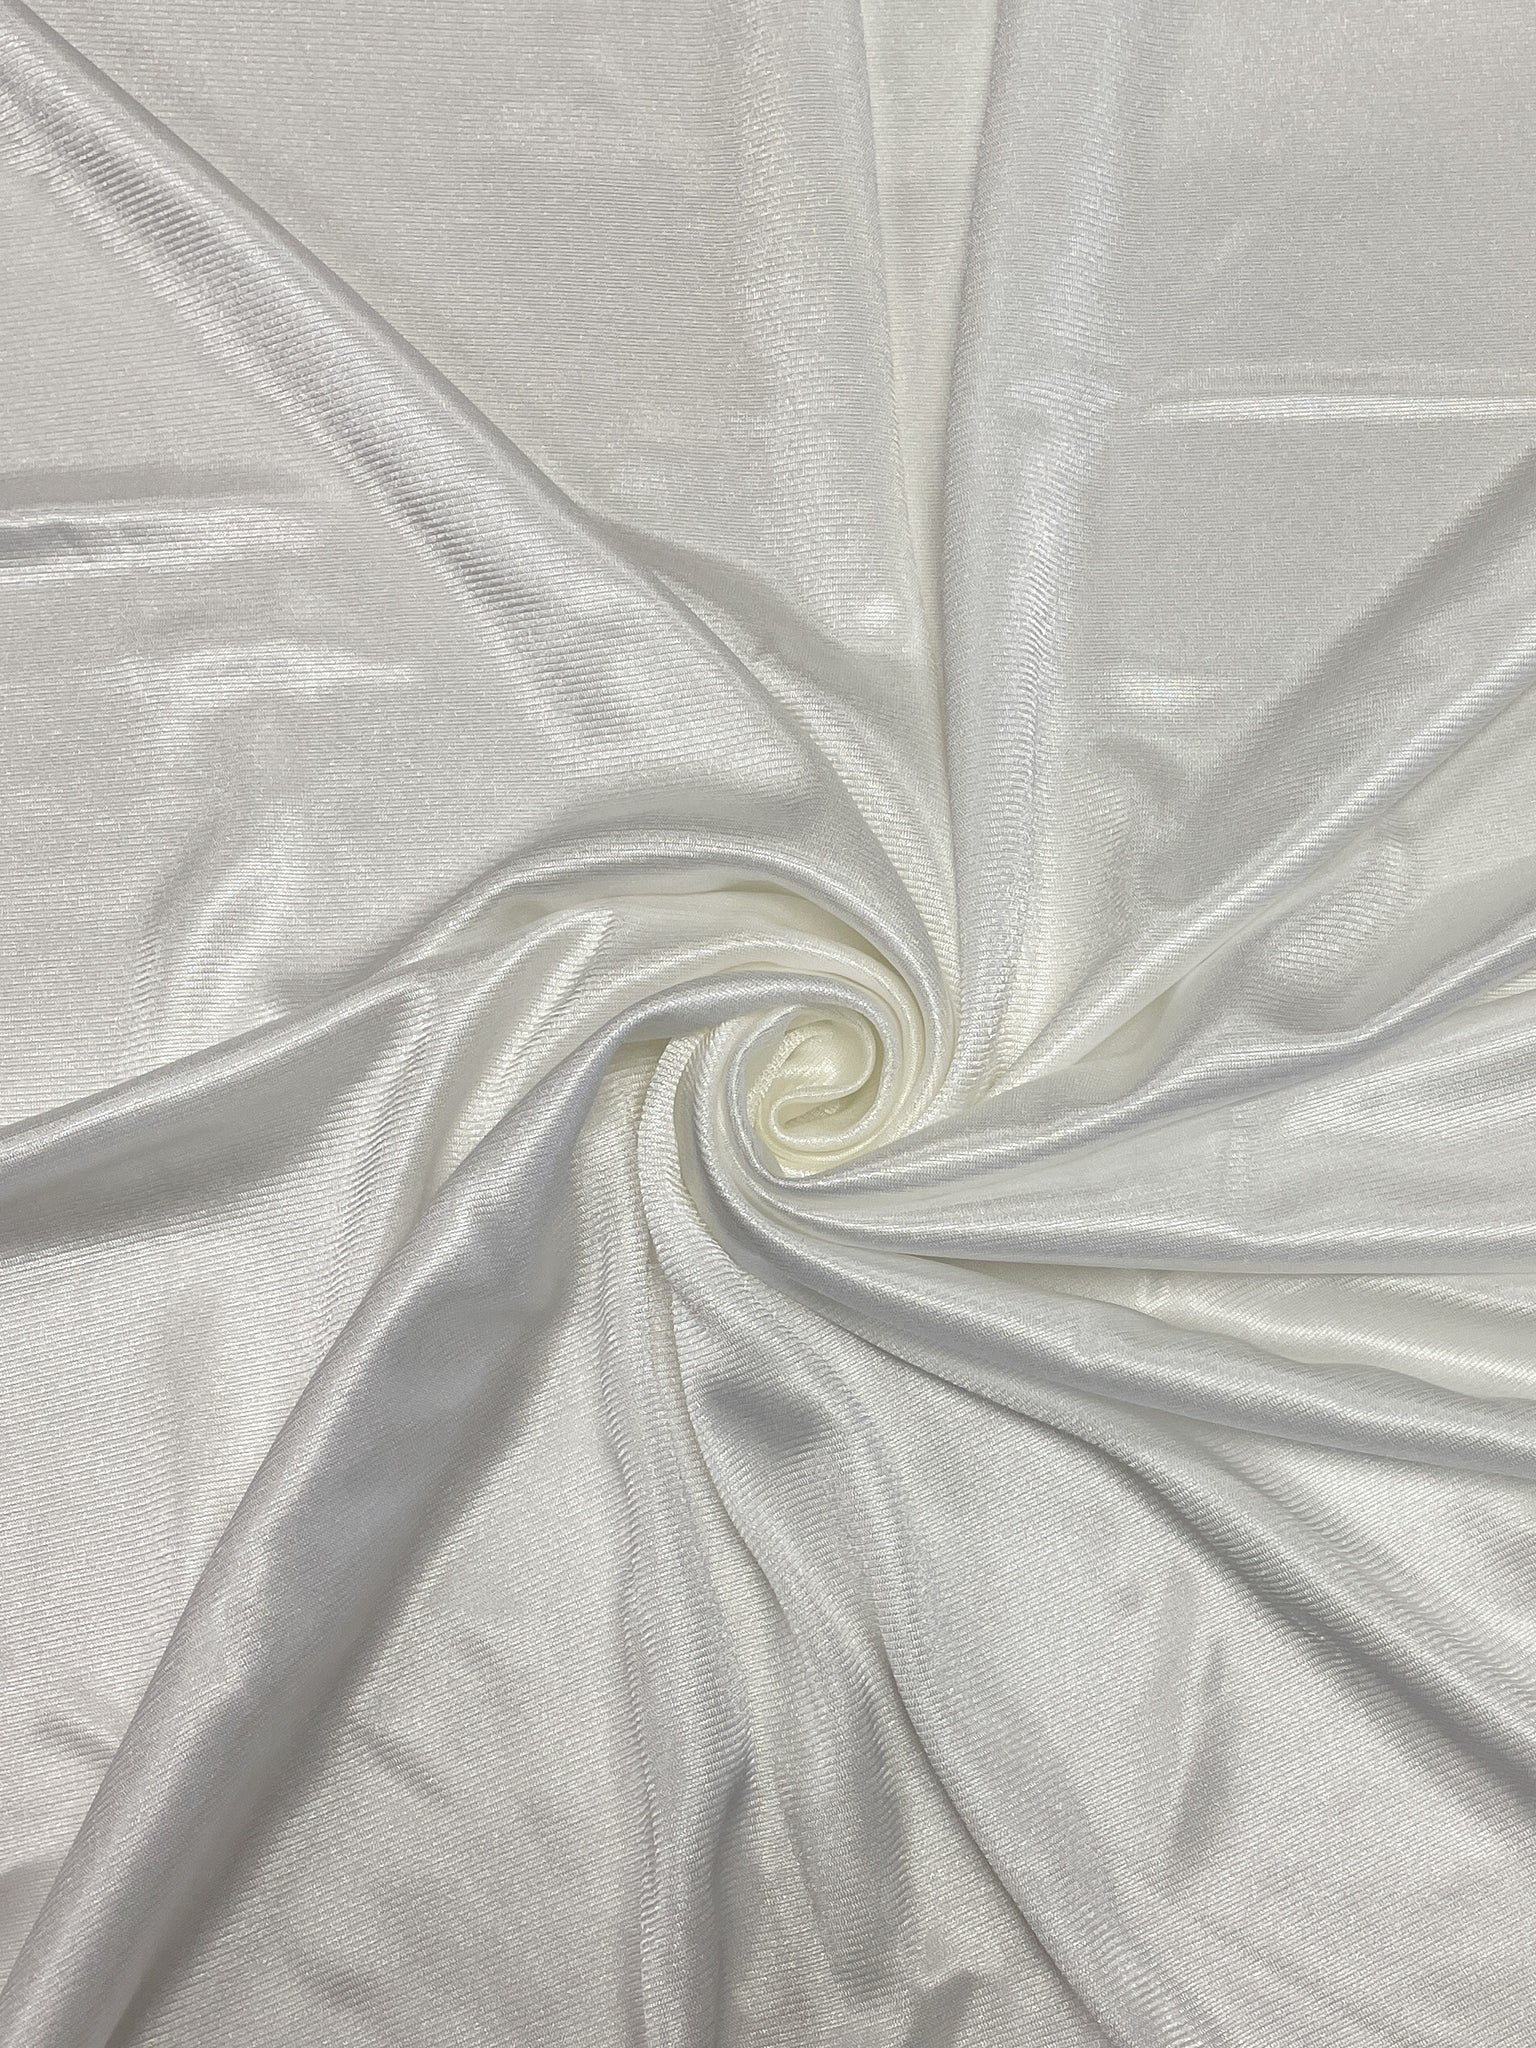 1 3/4 YD Polyester Tricot - Off White